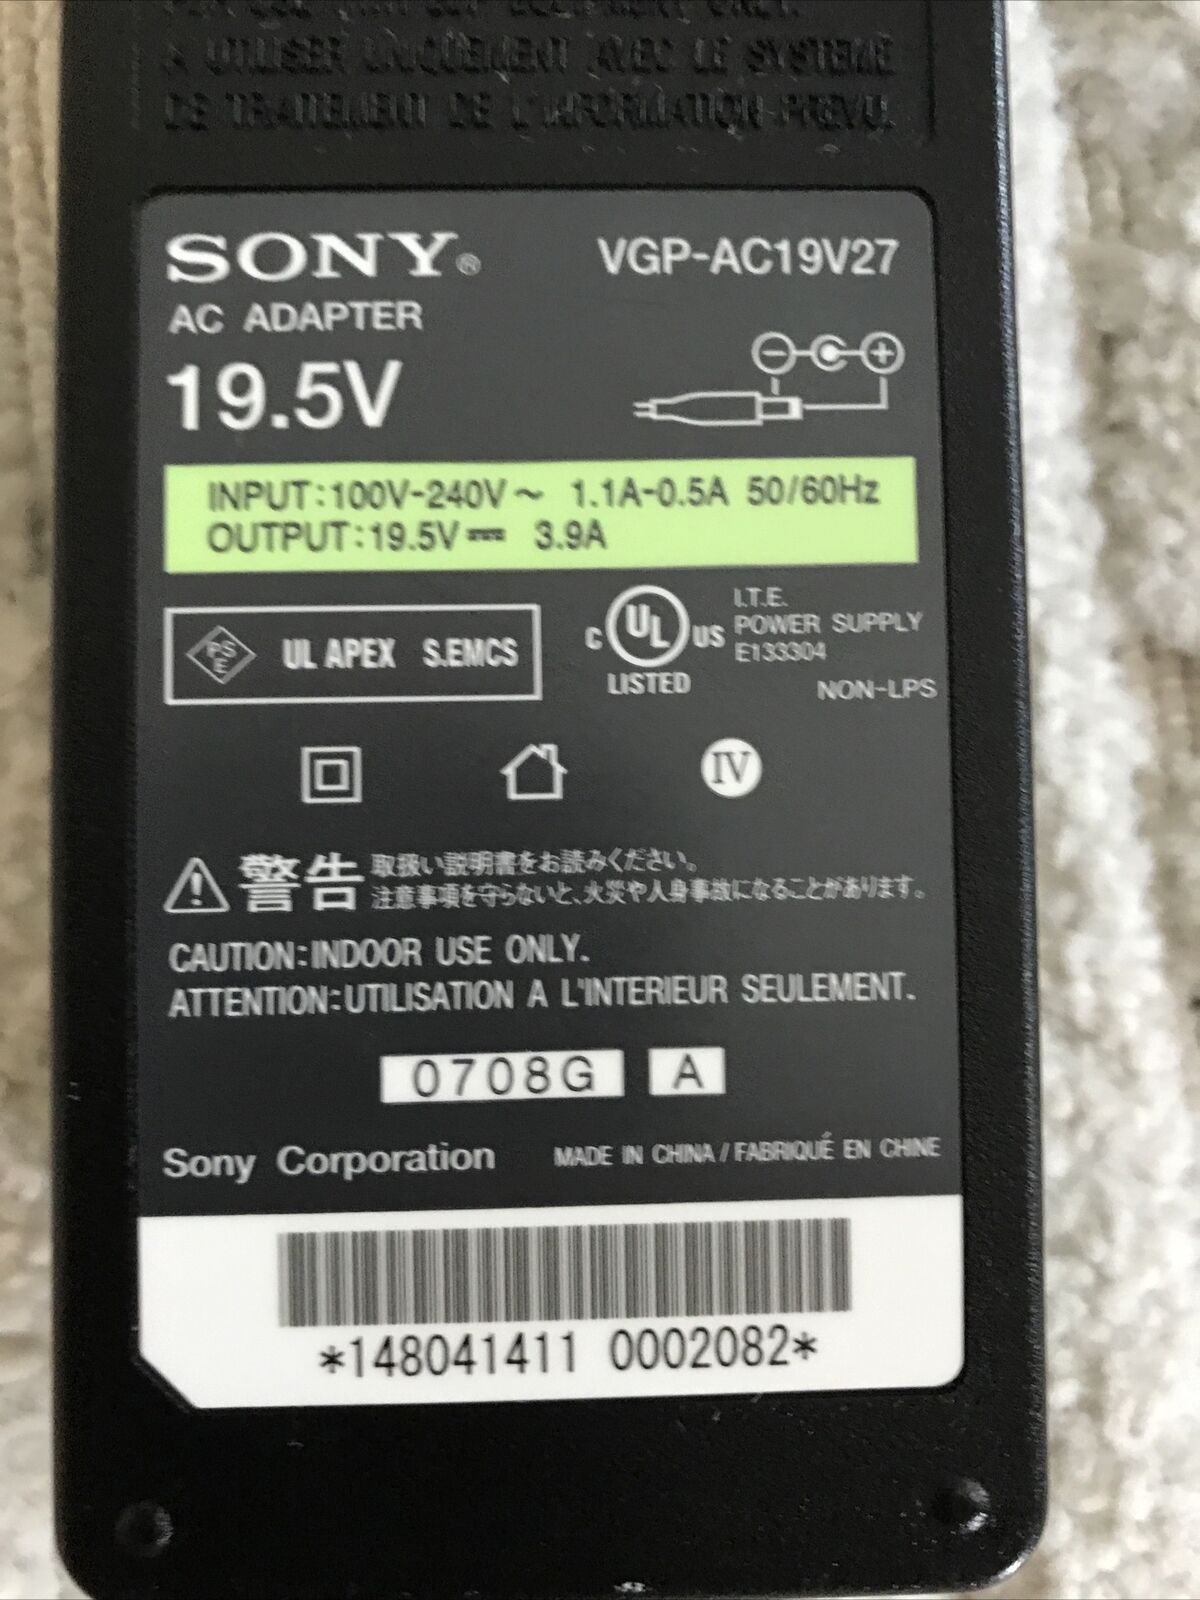 Sony Genuine Laptop Charger AC Adapter Power Supply VGP-AC19V27 19.5V 3.9A 76W Brand: Sony Color: Black Type: Power